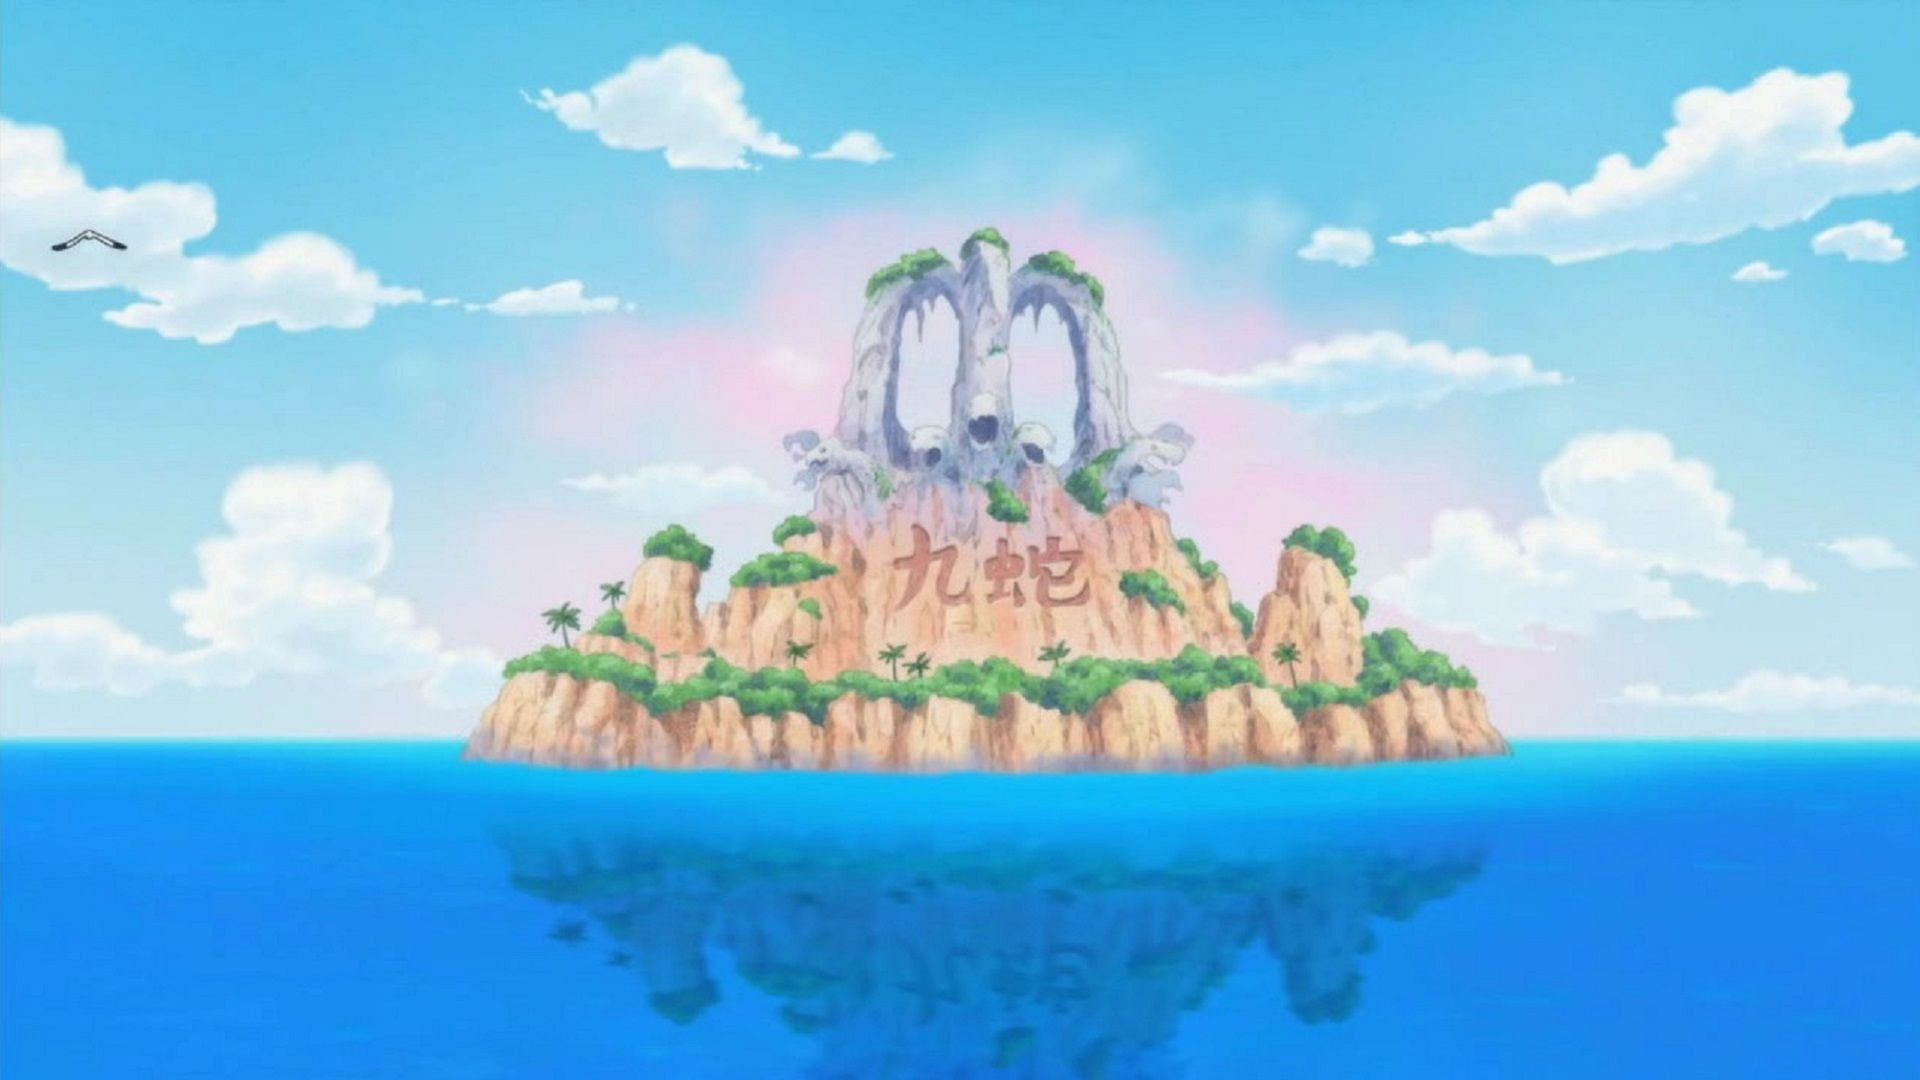 Amazon Lily as seen in One Piece (Image via Toei Animation, One Piece)